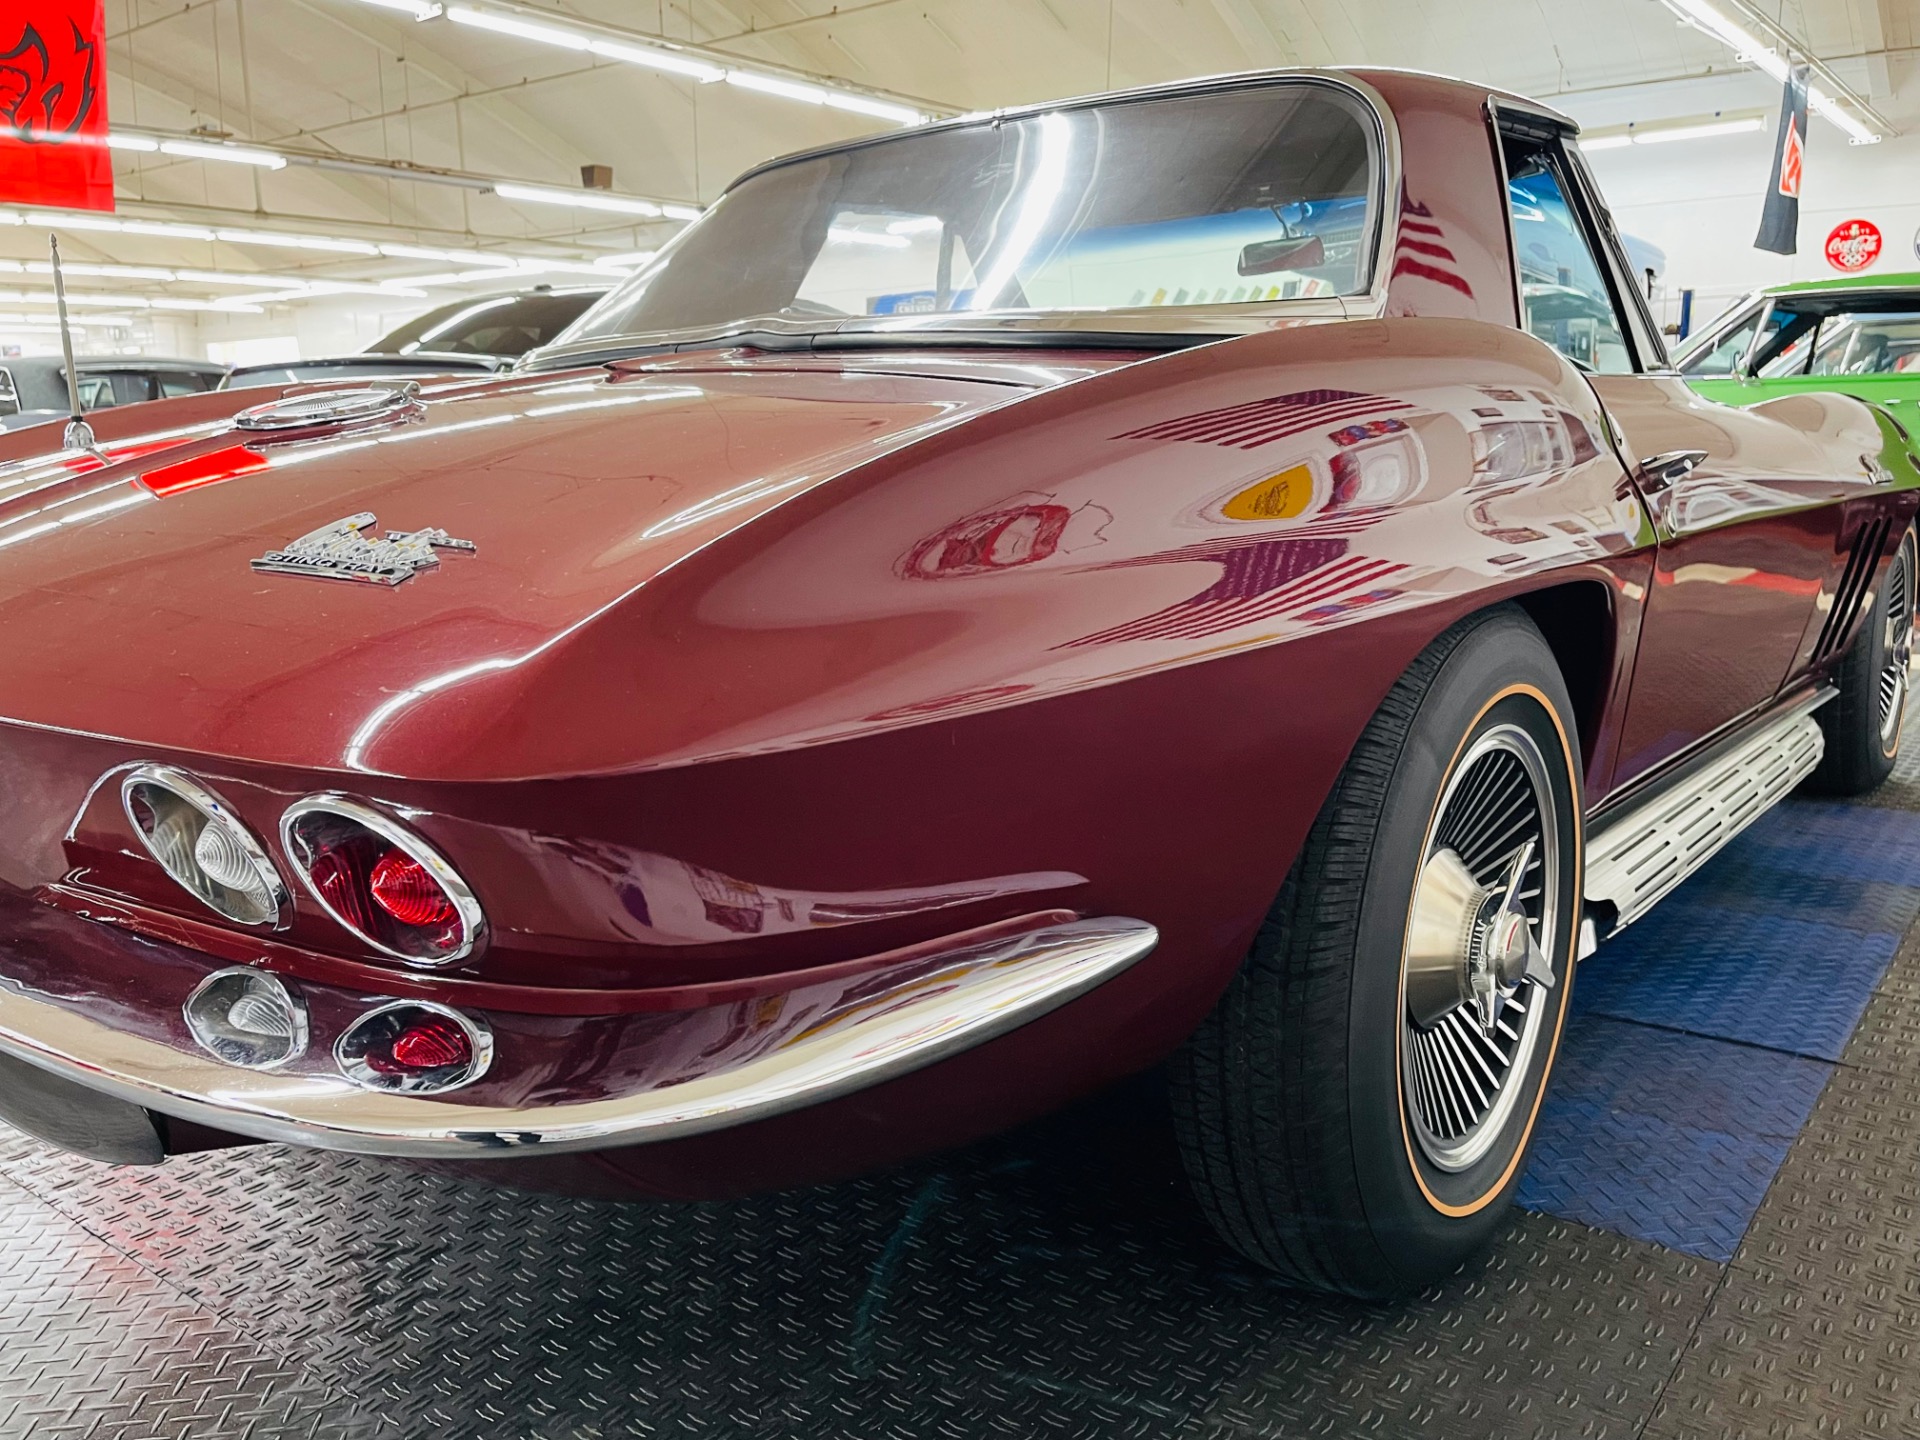 Used 1966 Chevrolet Corvette - CONVERTIBLE - TWO TOPS - 425HP 427 ENGINE - SEE VIDEO | Mundelein, IL